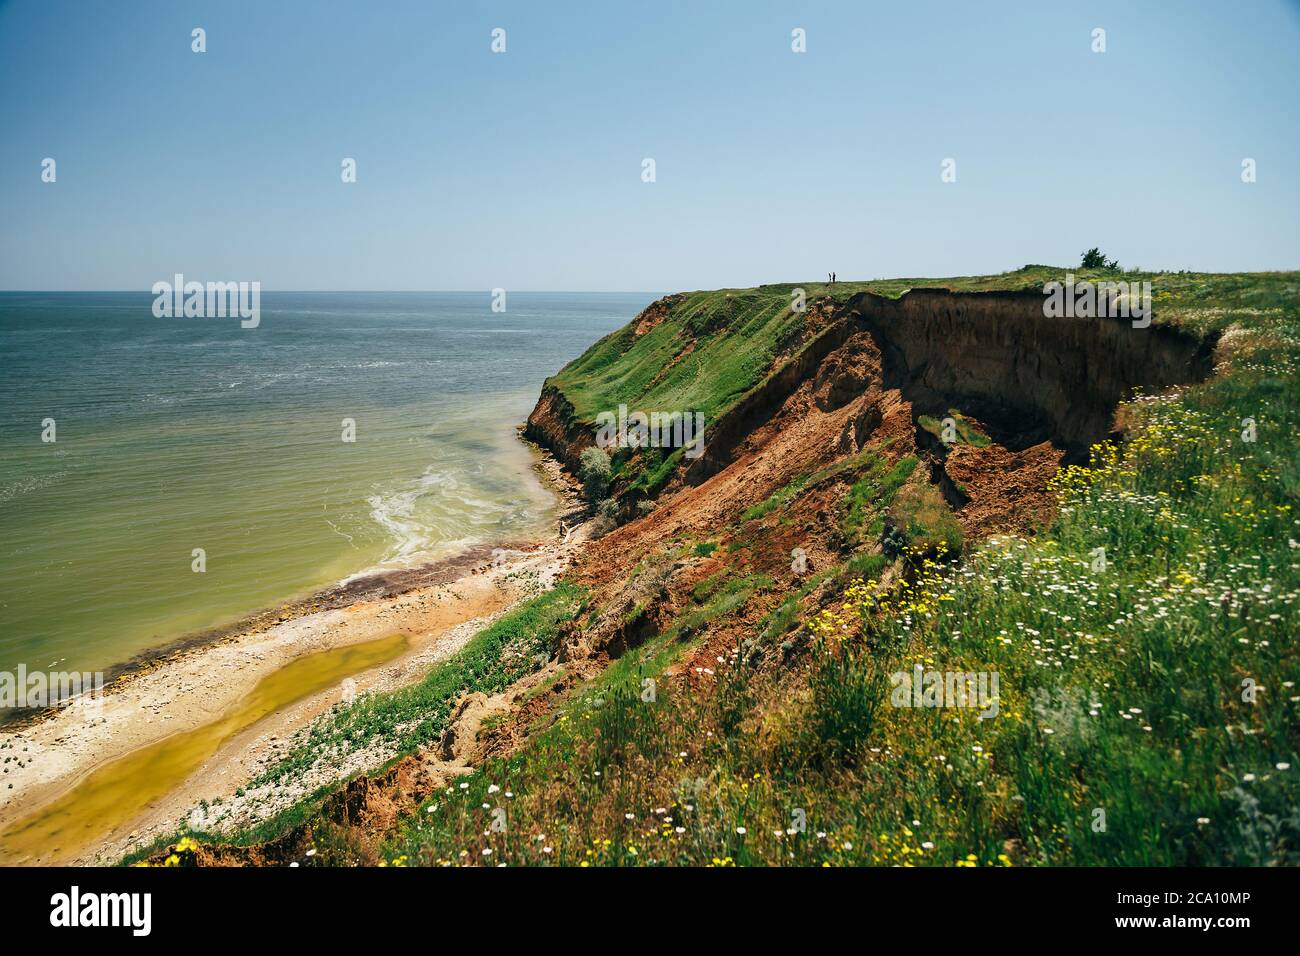 ODESSA, UKRAINE - MAY, 20 2015: People standing over the huge landslide on the coast of the Black sea Stock Photo